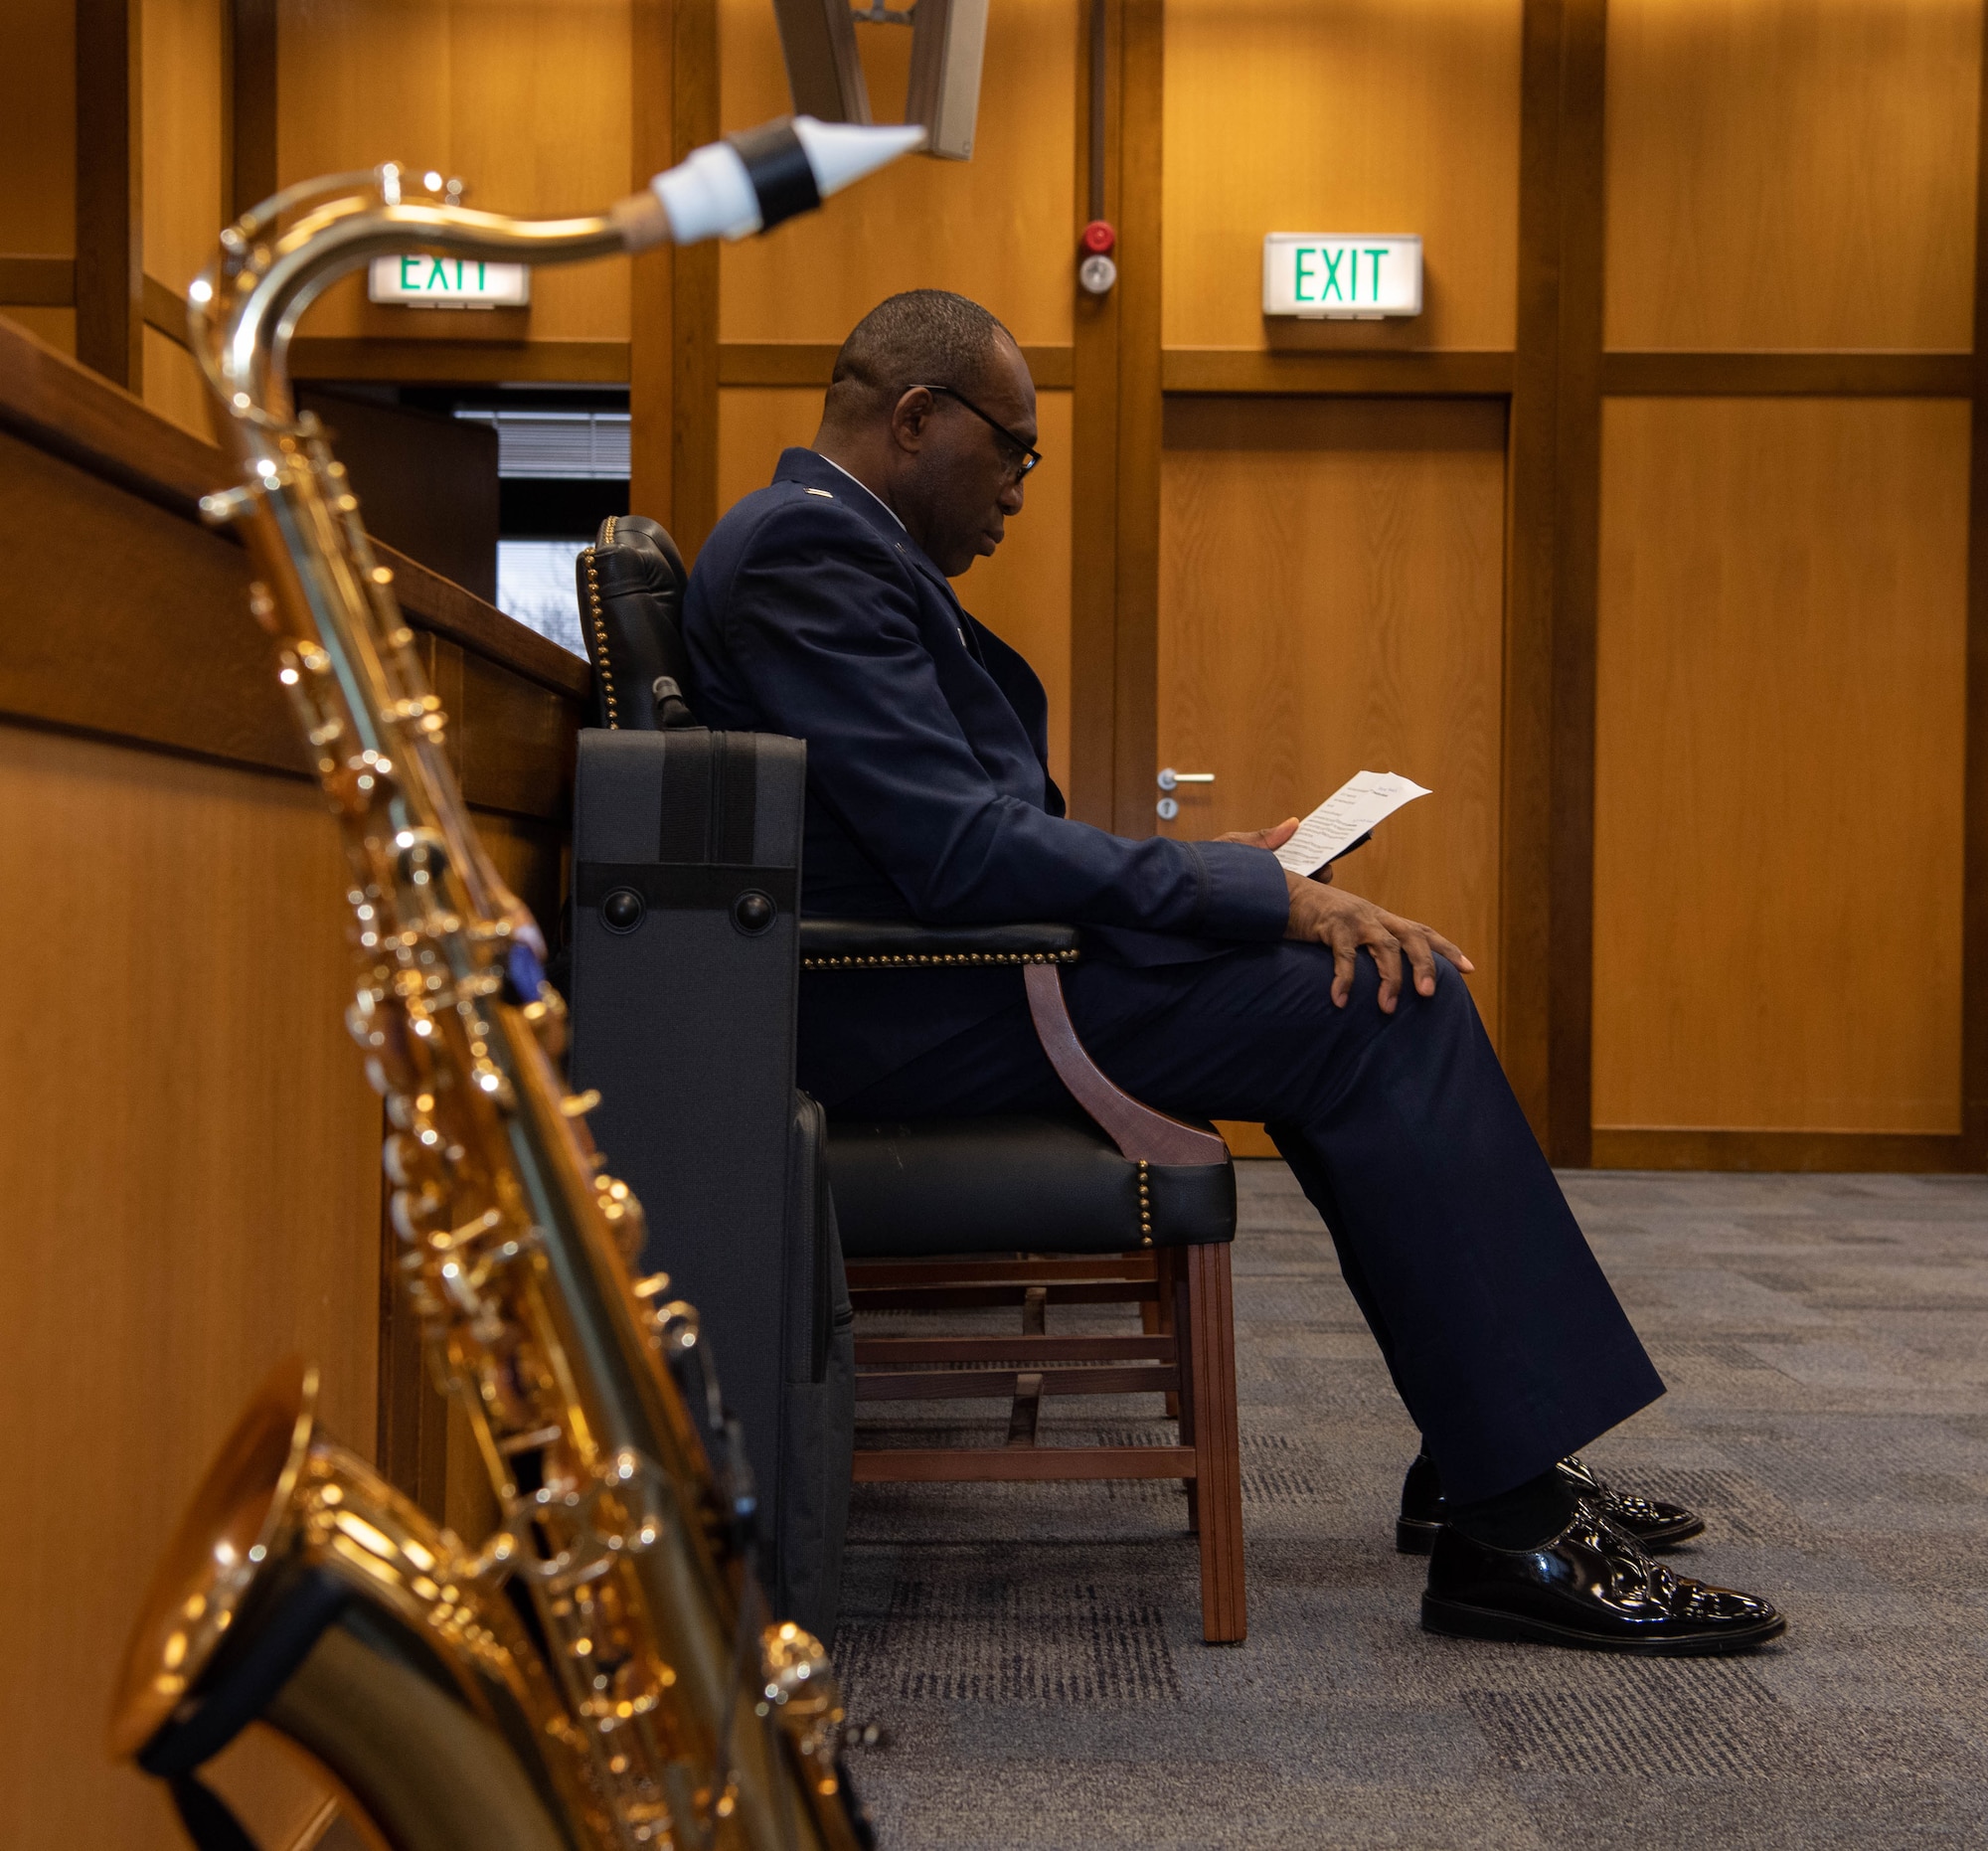 Man reads a paper in the background, a saxophone is shown in the foreground